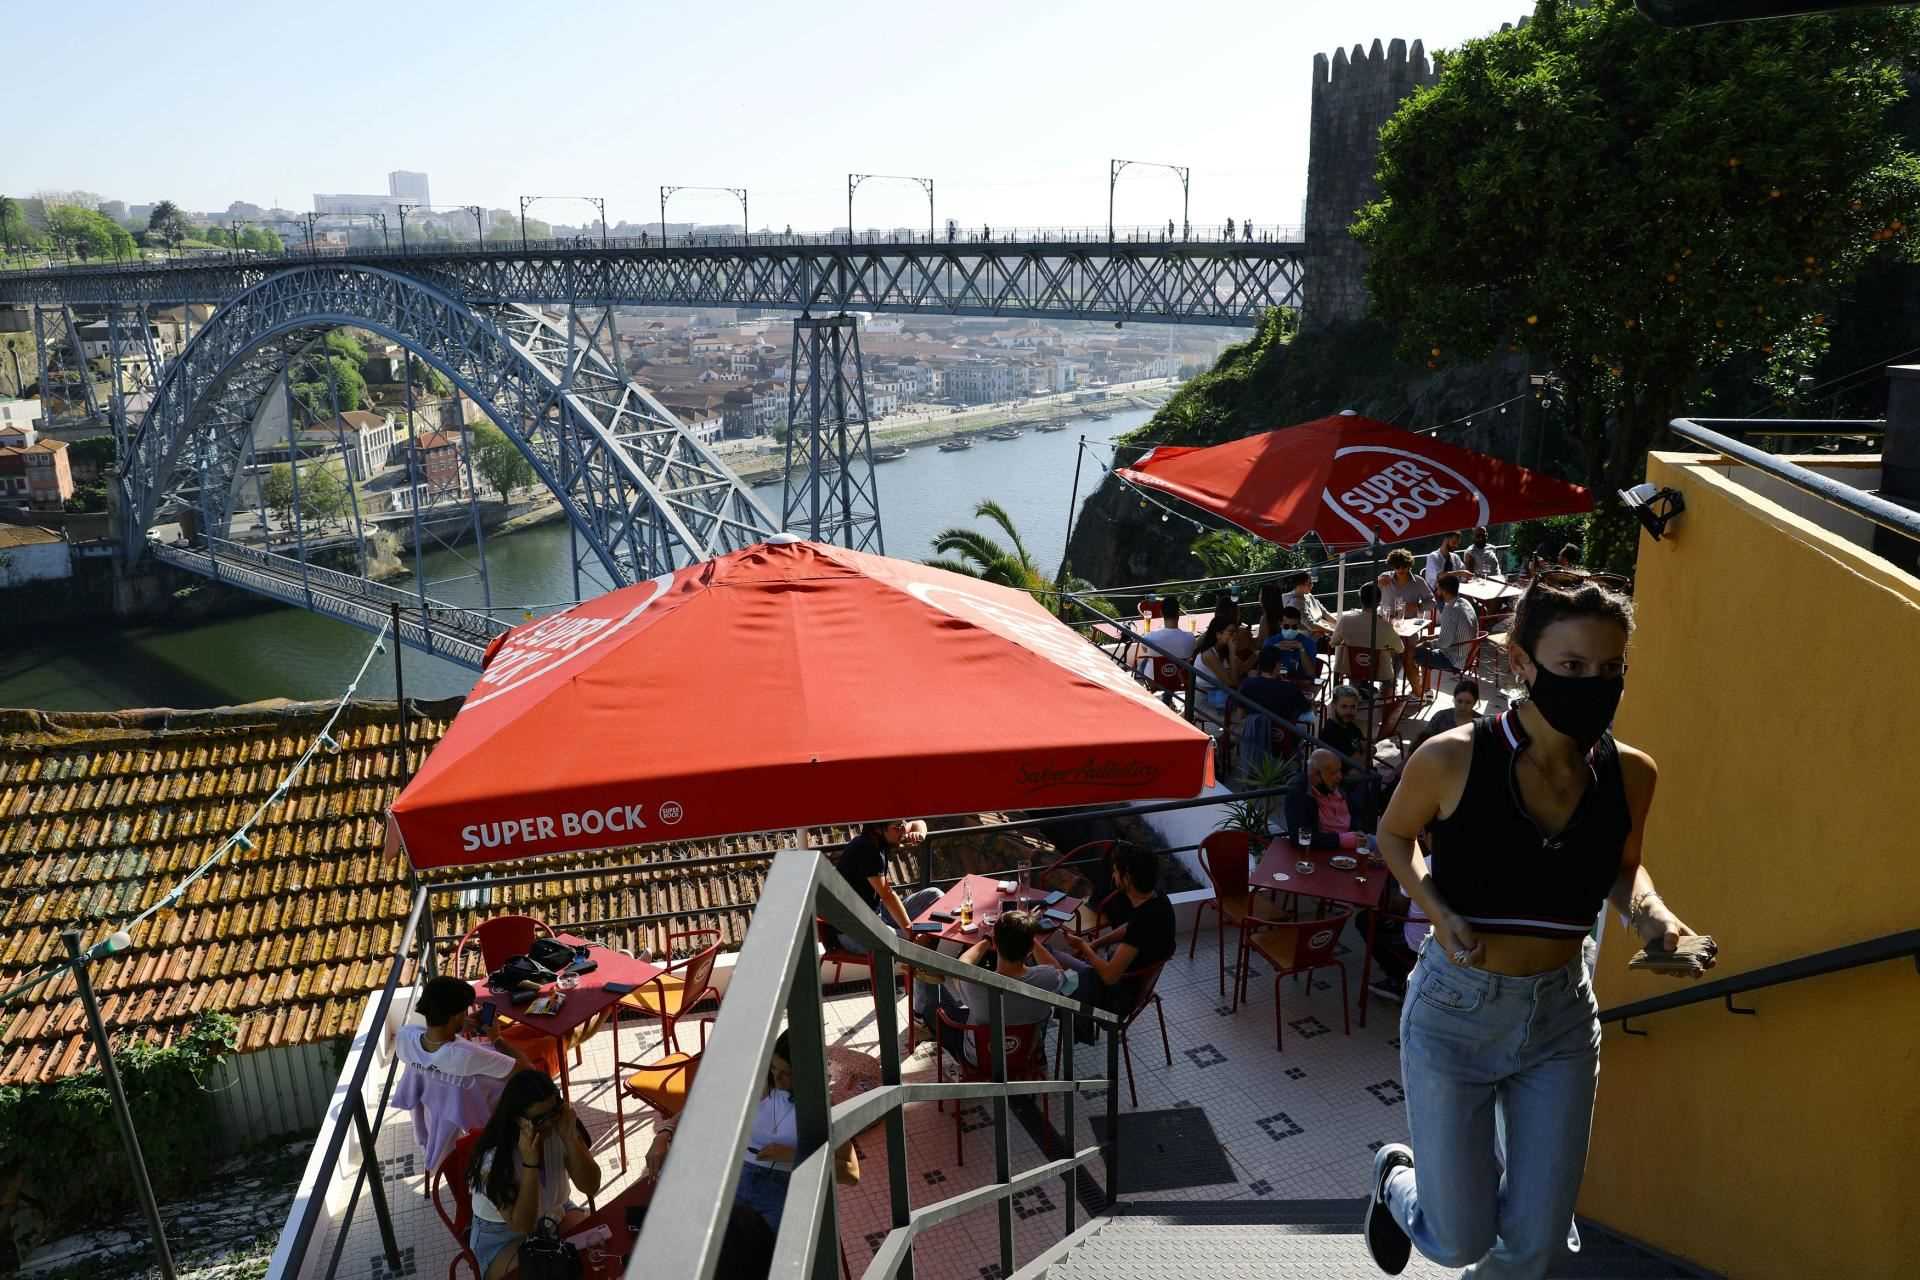 The United Kingdom was preceded by Portugal, which authorized the terraces of cafes to be once again taken over by customers on April 5, as here in Porto.